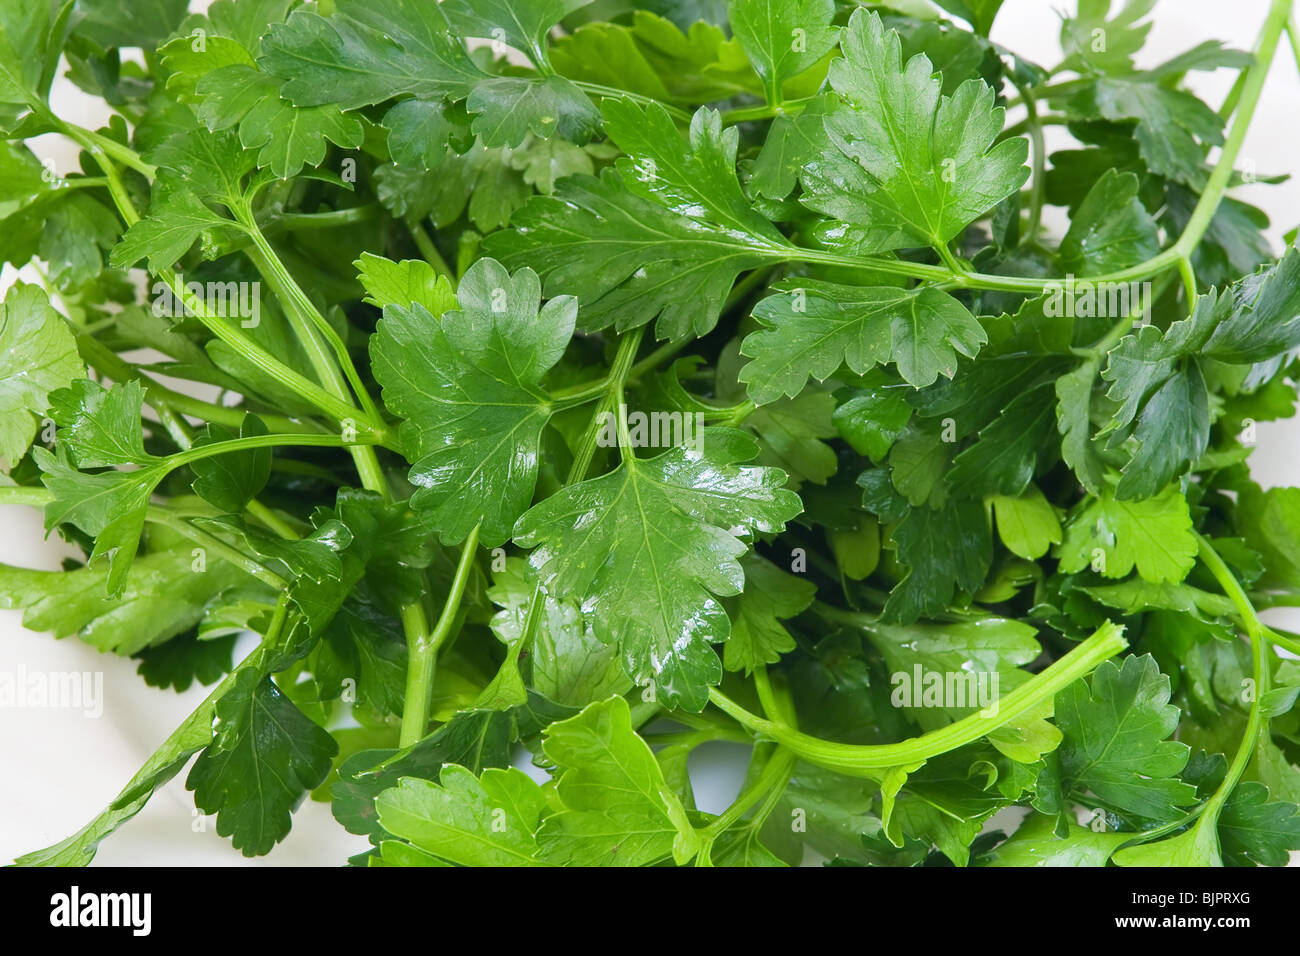 Closeup of fresh parsley on a plate Stock Photo